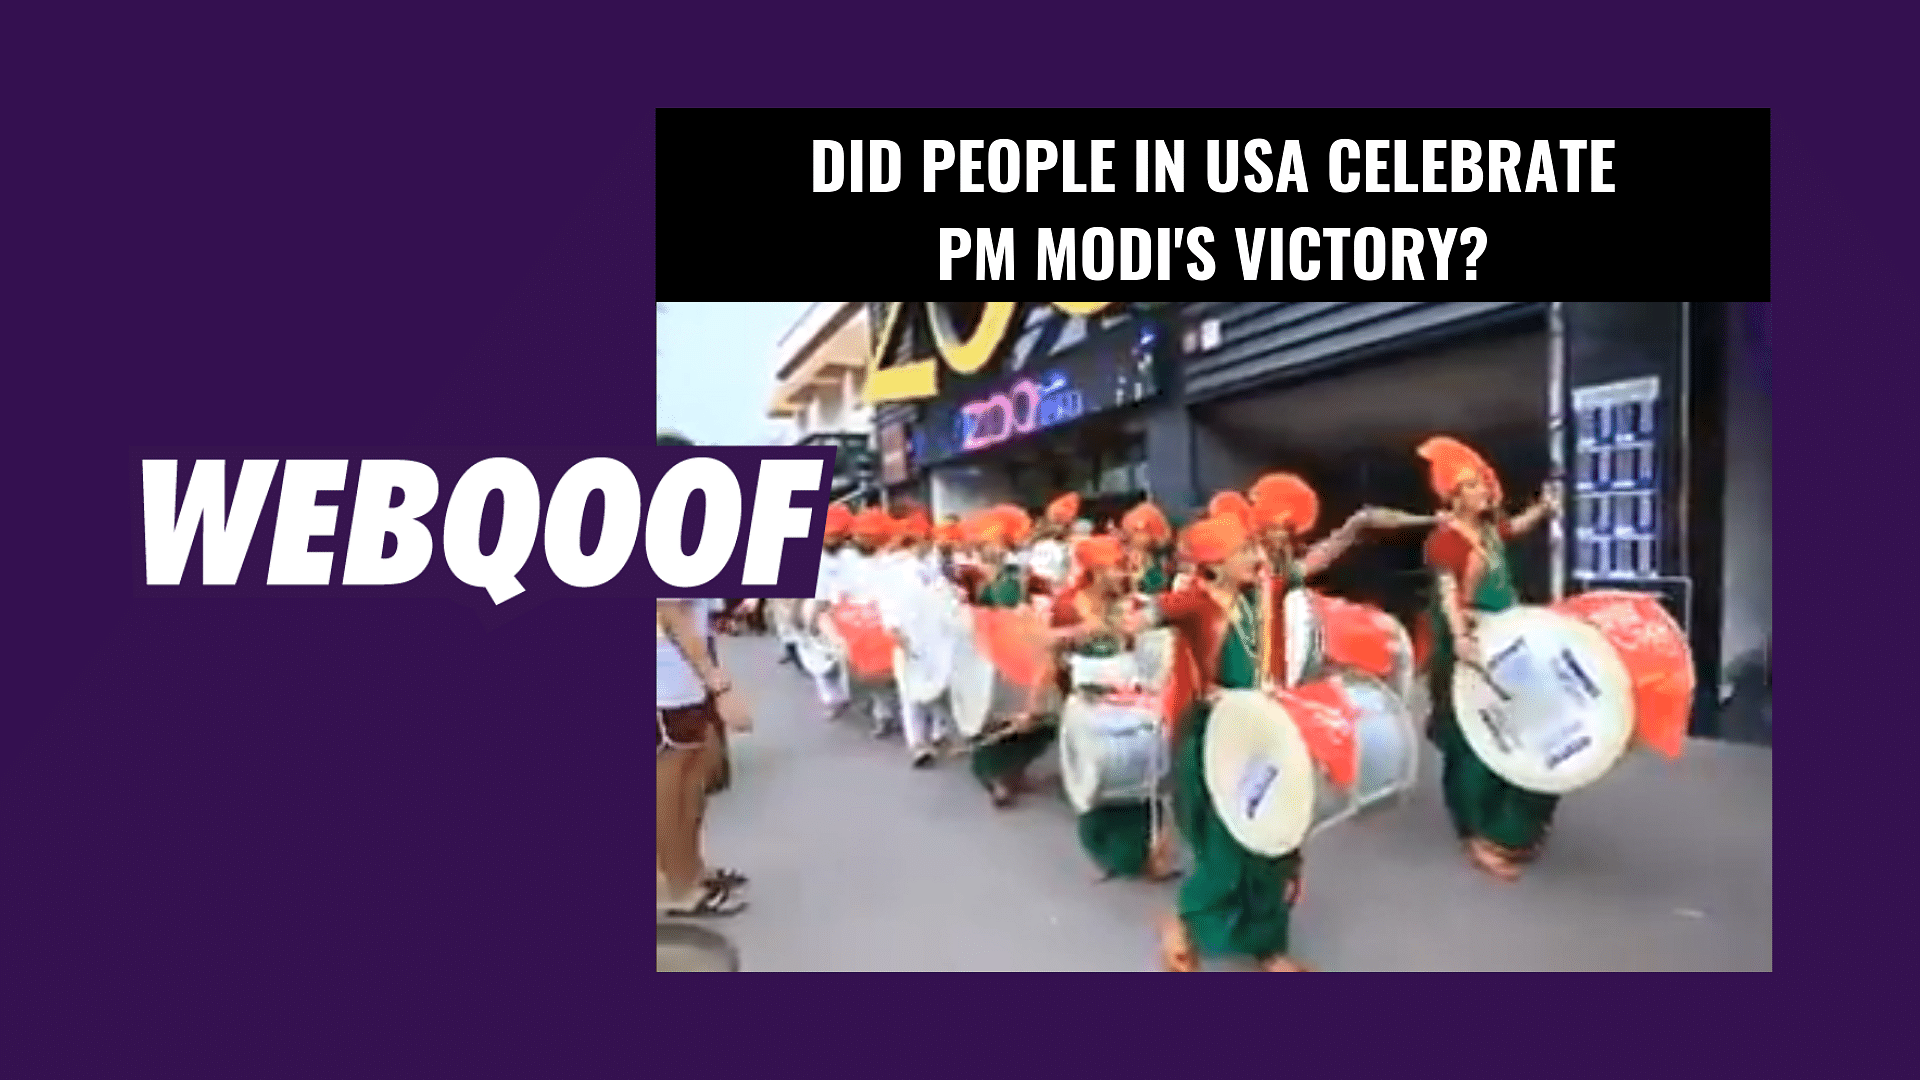 A viral video falsely claimed that people in USA celebrated Narendra Modi’s recent win.